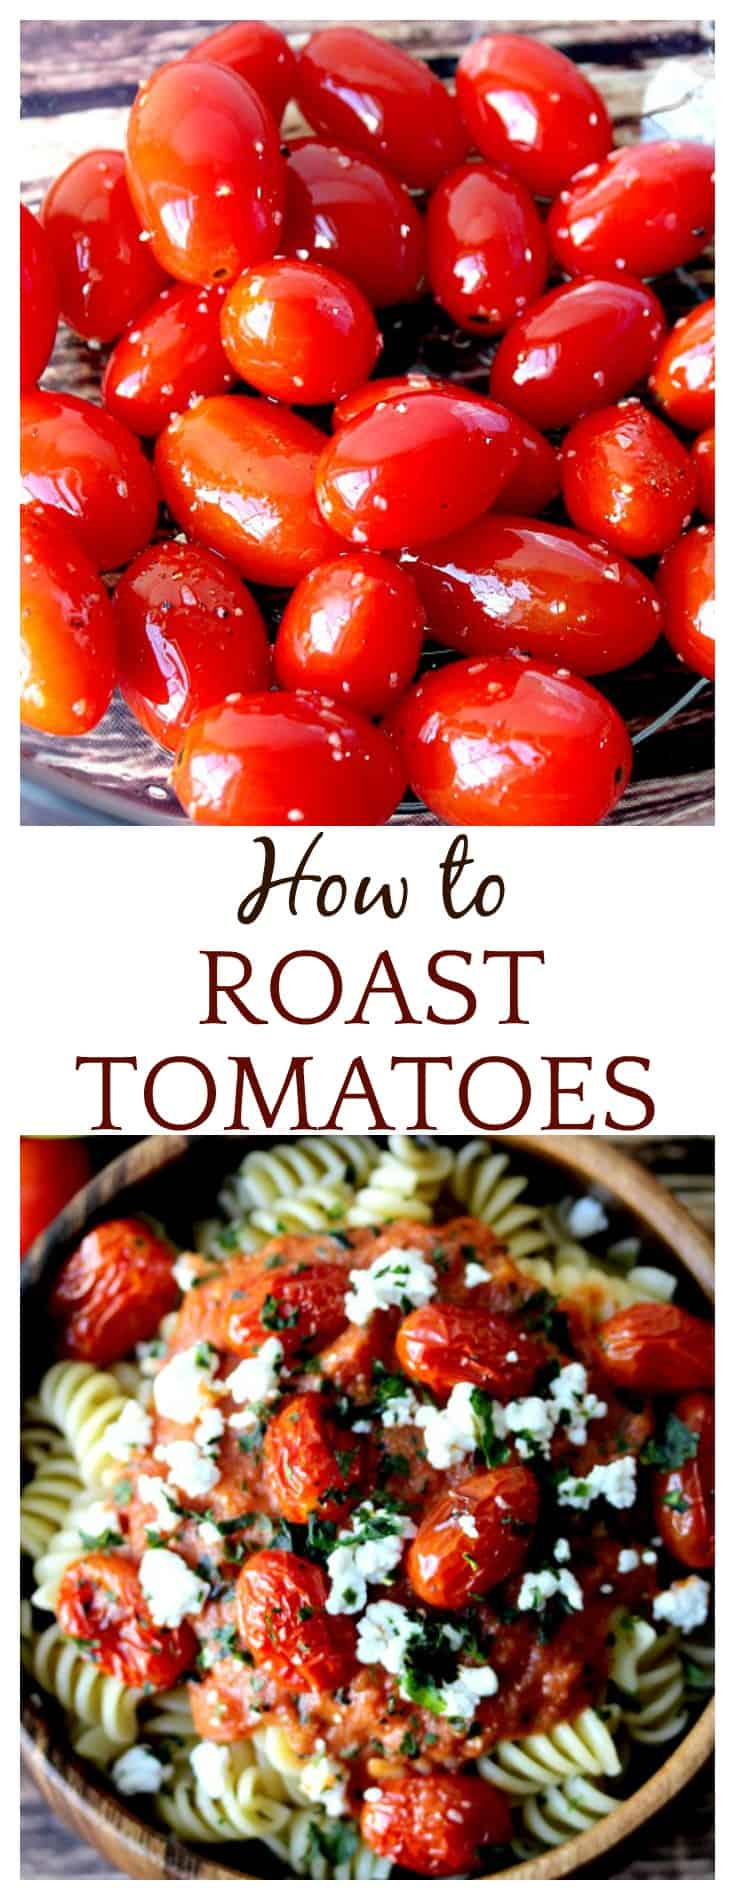 If only I knew how to make oven roasted tomatoes was so easy I would have done it a hundred times already!! Use this easy roasted tomatoes recipe to add these delicious little pops of flavor to all kinds of dishes from pasta to salads to sandwiches! Just yum! 